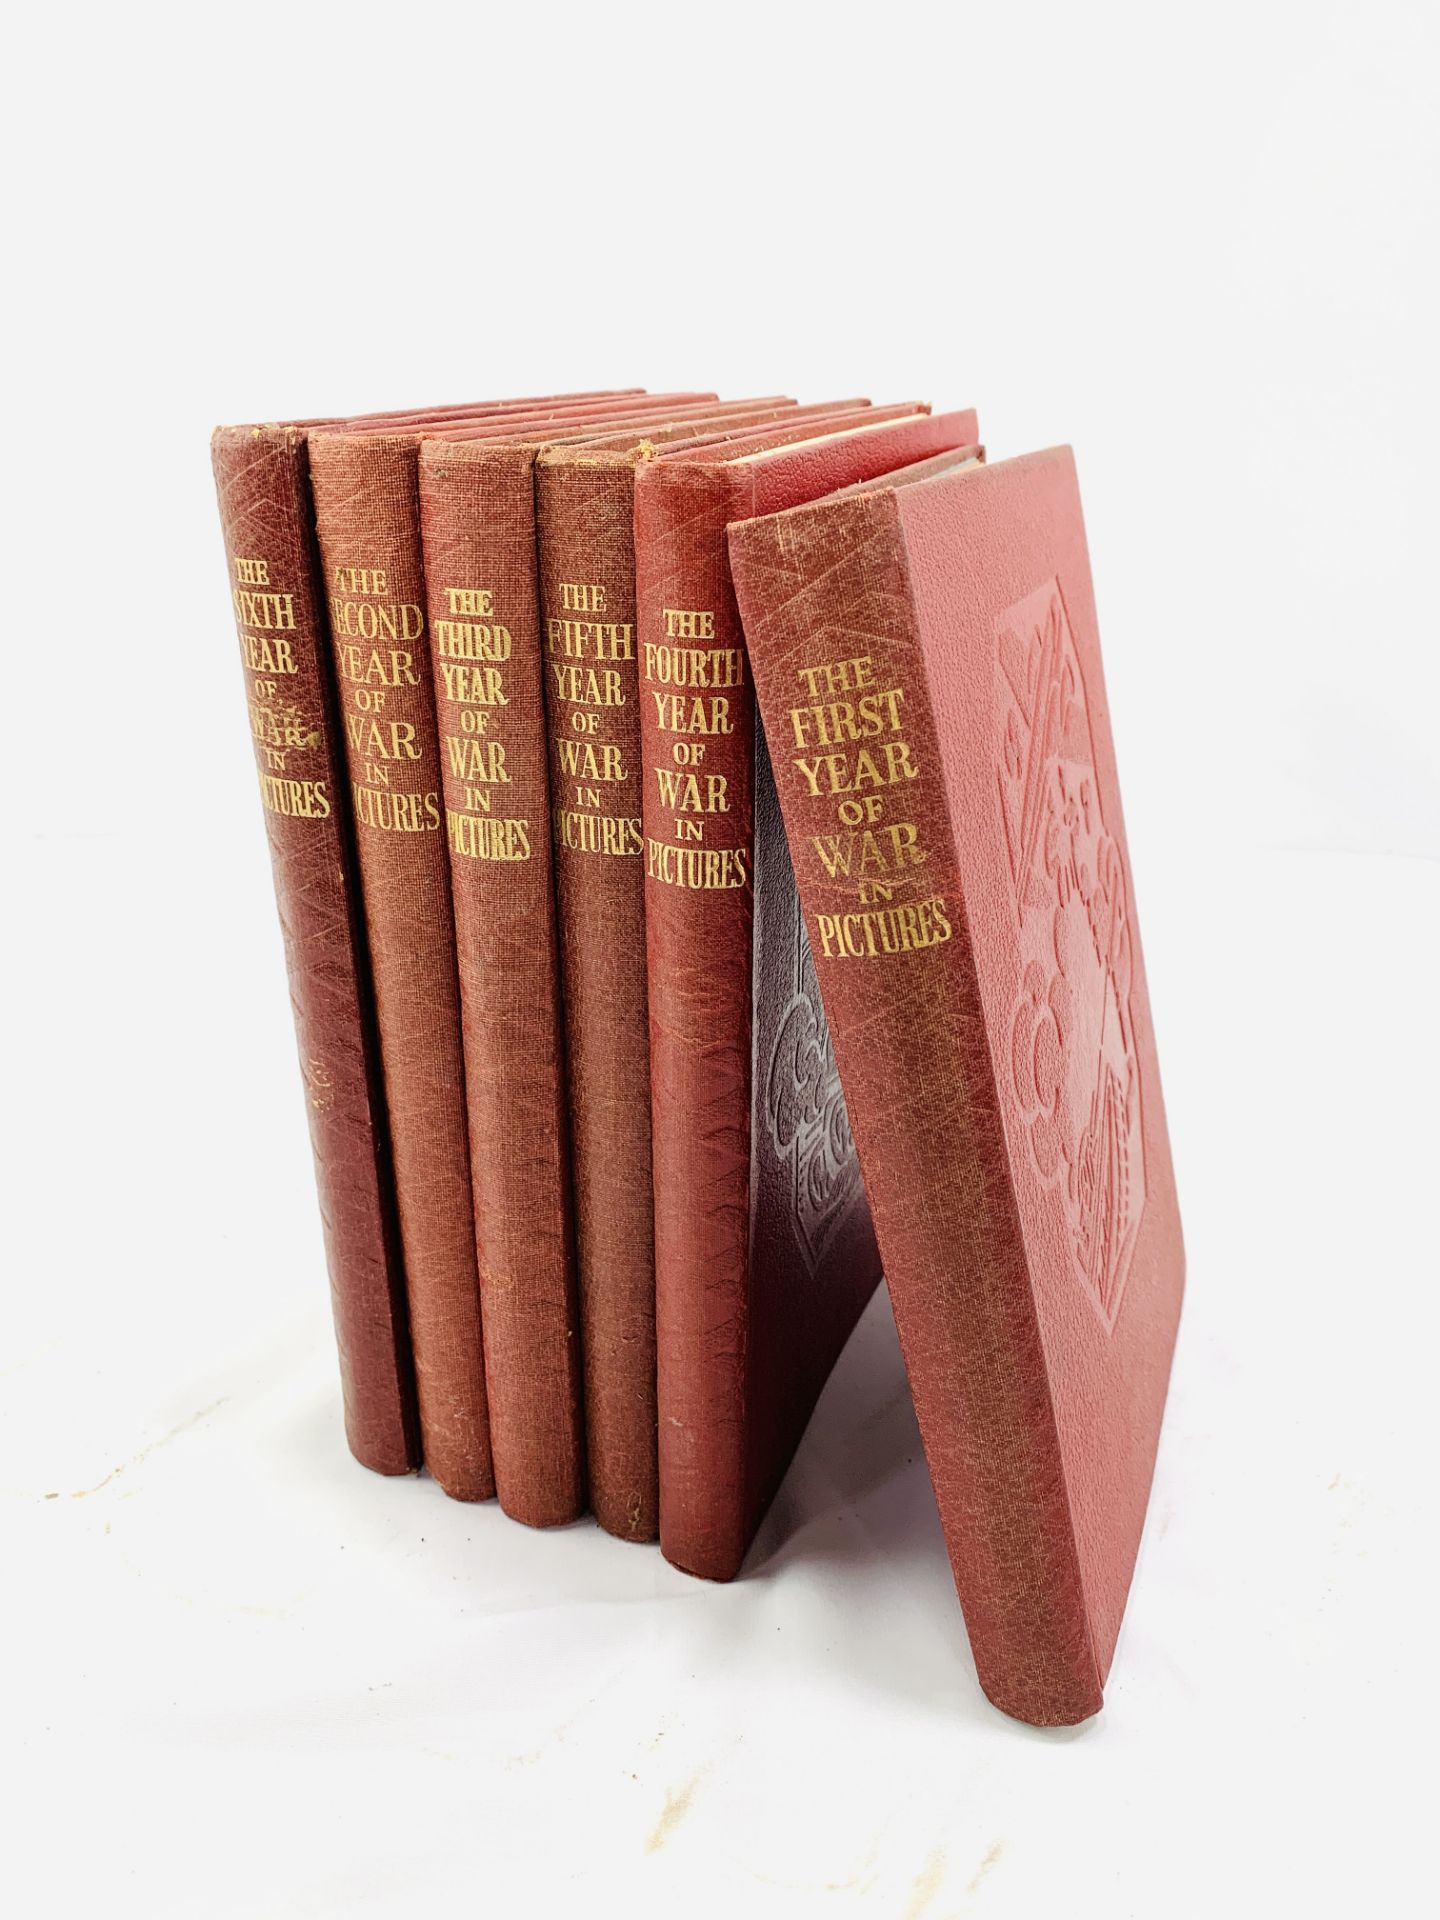 Six volumes of "The War in Pictures" by Odhams Press Limited